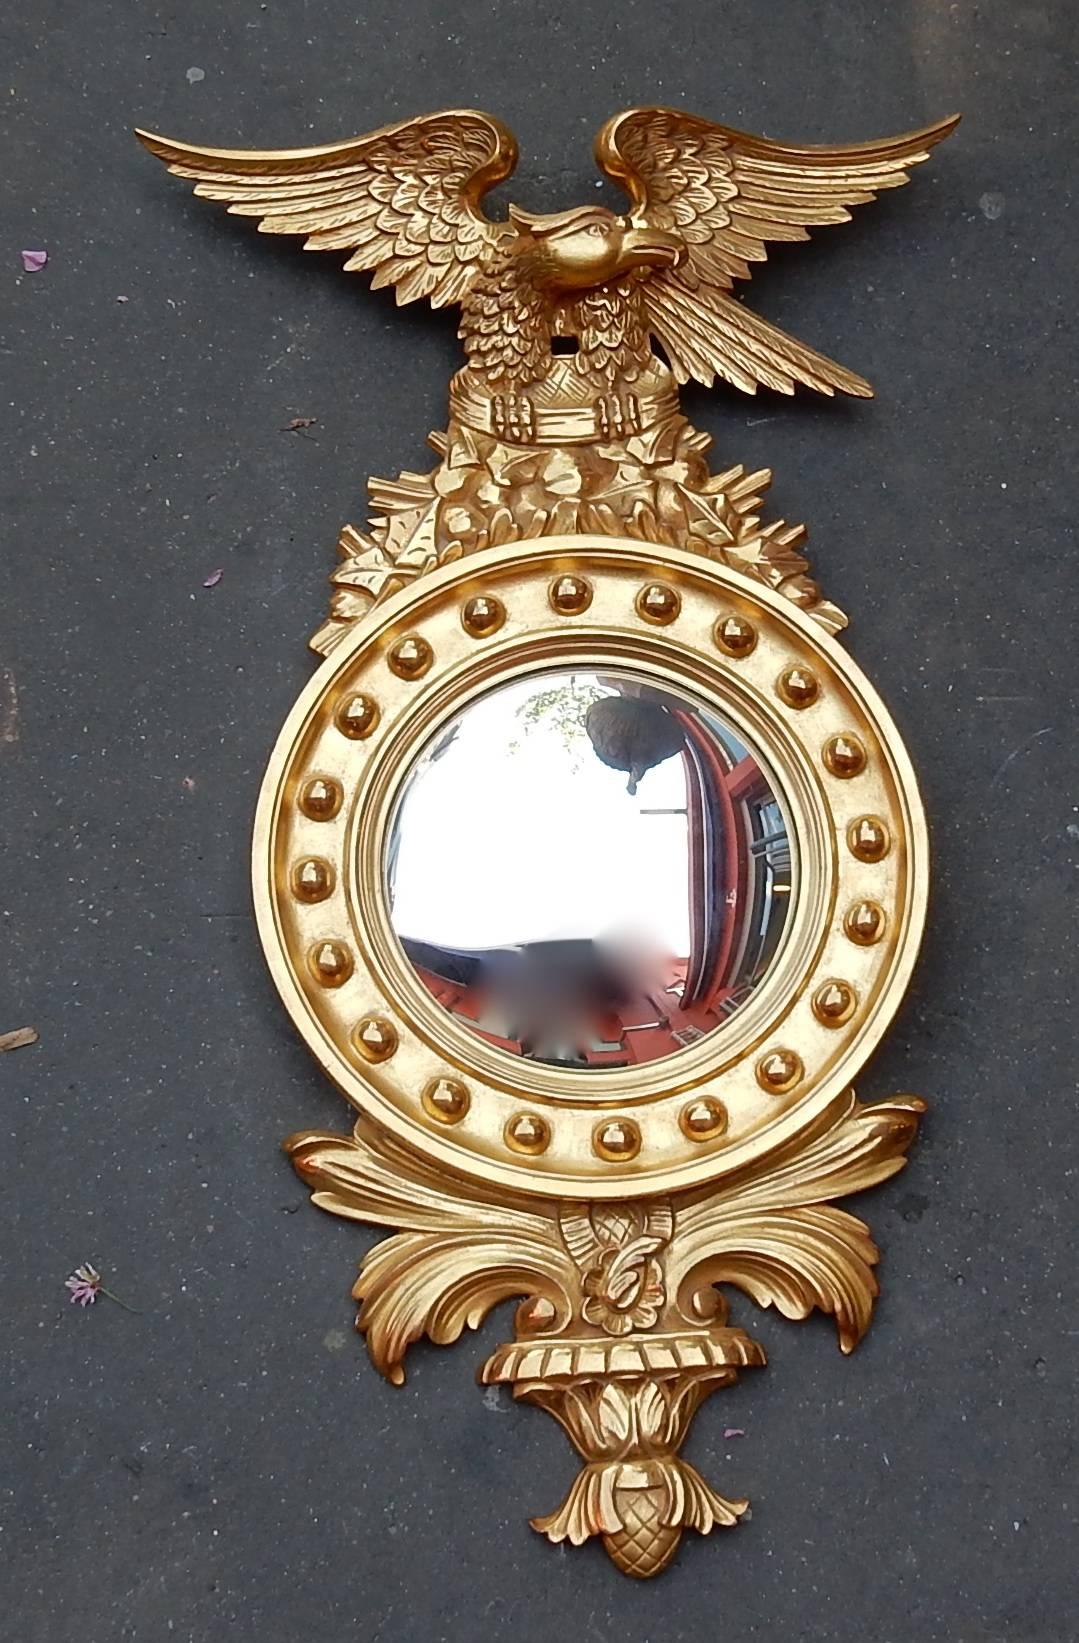 Mirror wood guilt 22-carat
1950-1970
Good condition
Mirror convex in the middle, measure: Height 97 cm, diameter 27 cm.